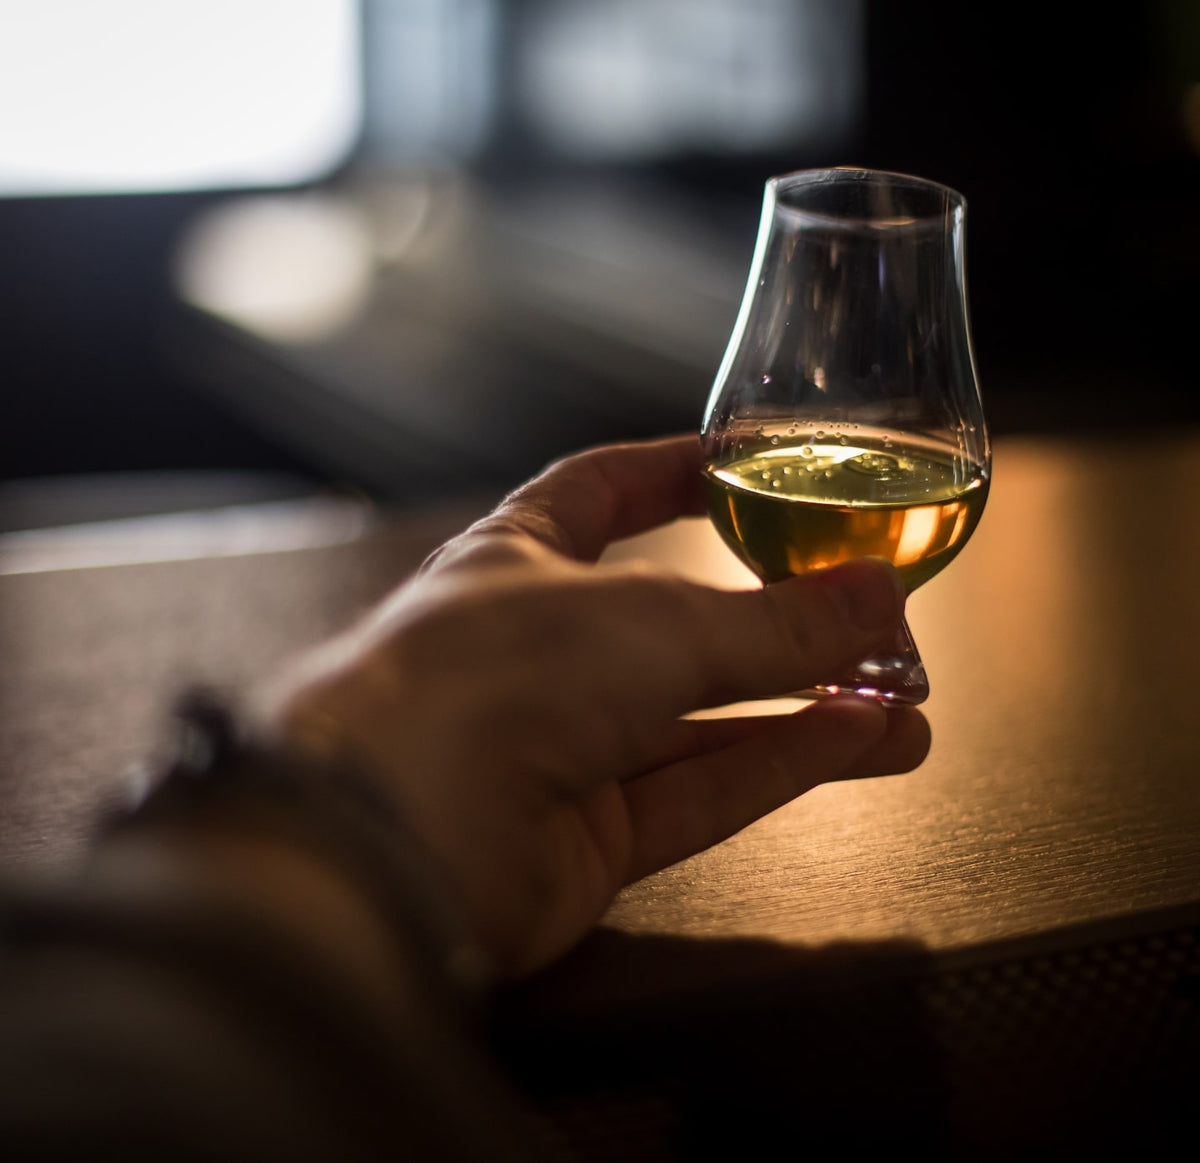 Whisky glass containing some whisky in the hand of someone resting on a table